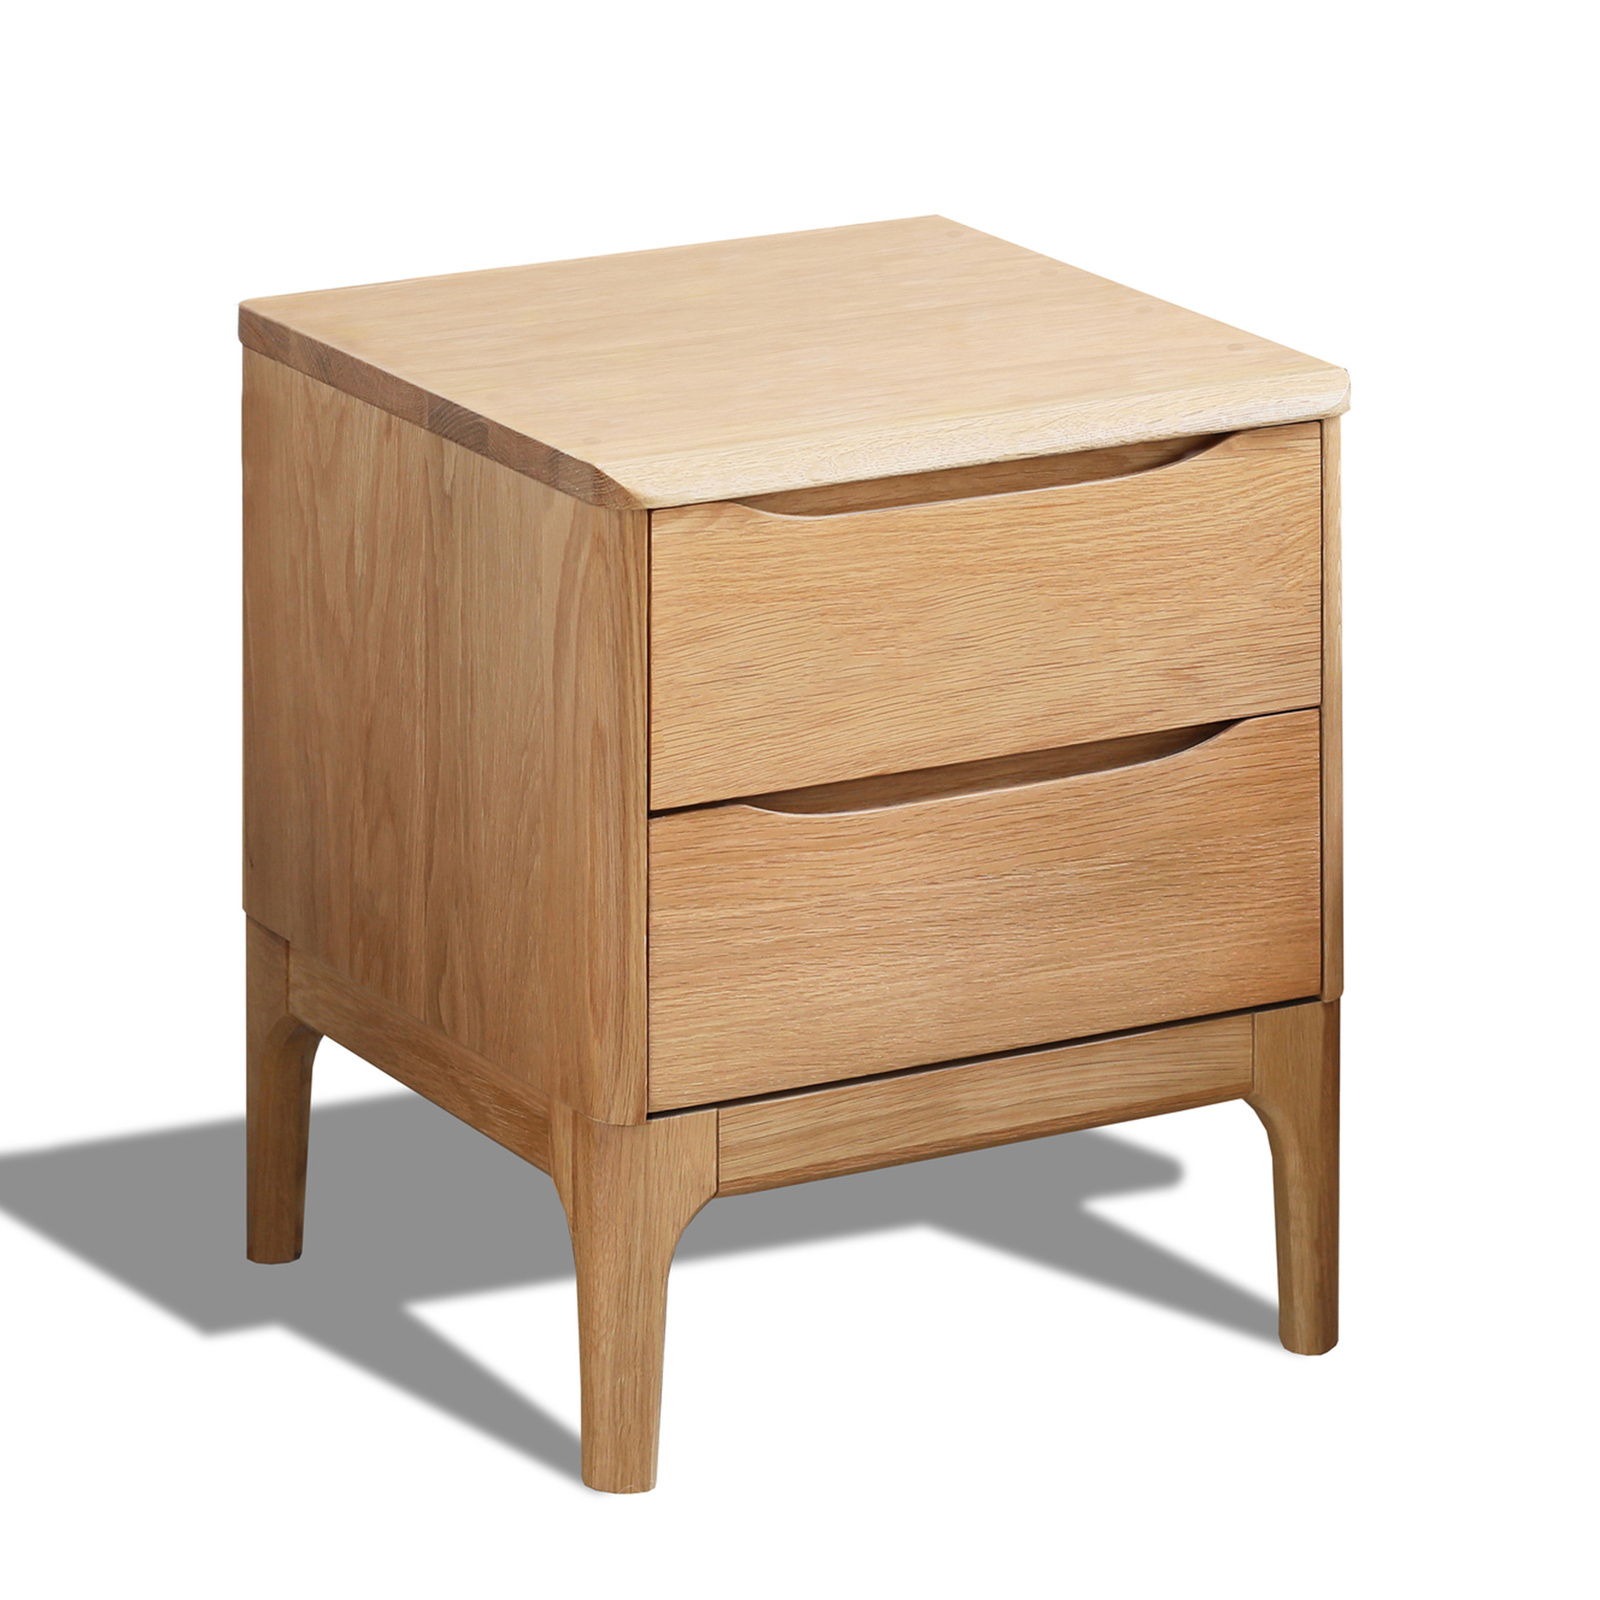 MIUZ Solid Timber Bedside Tables Drawers Side Table Nightstand Storage Cabinet Wood